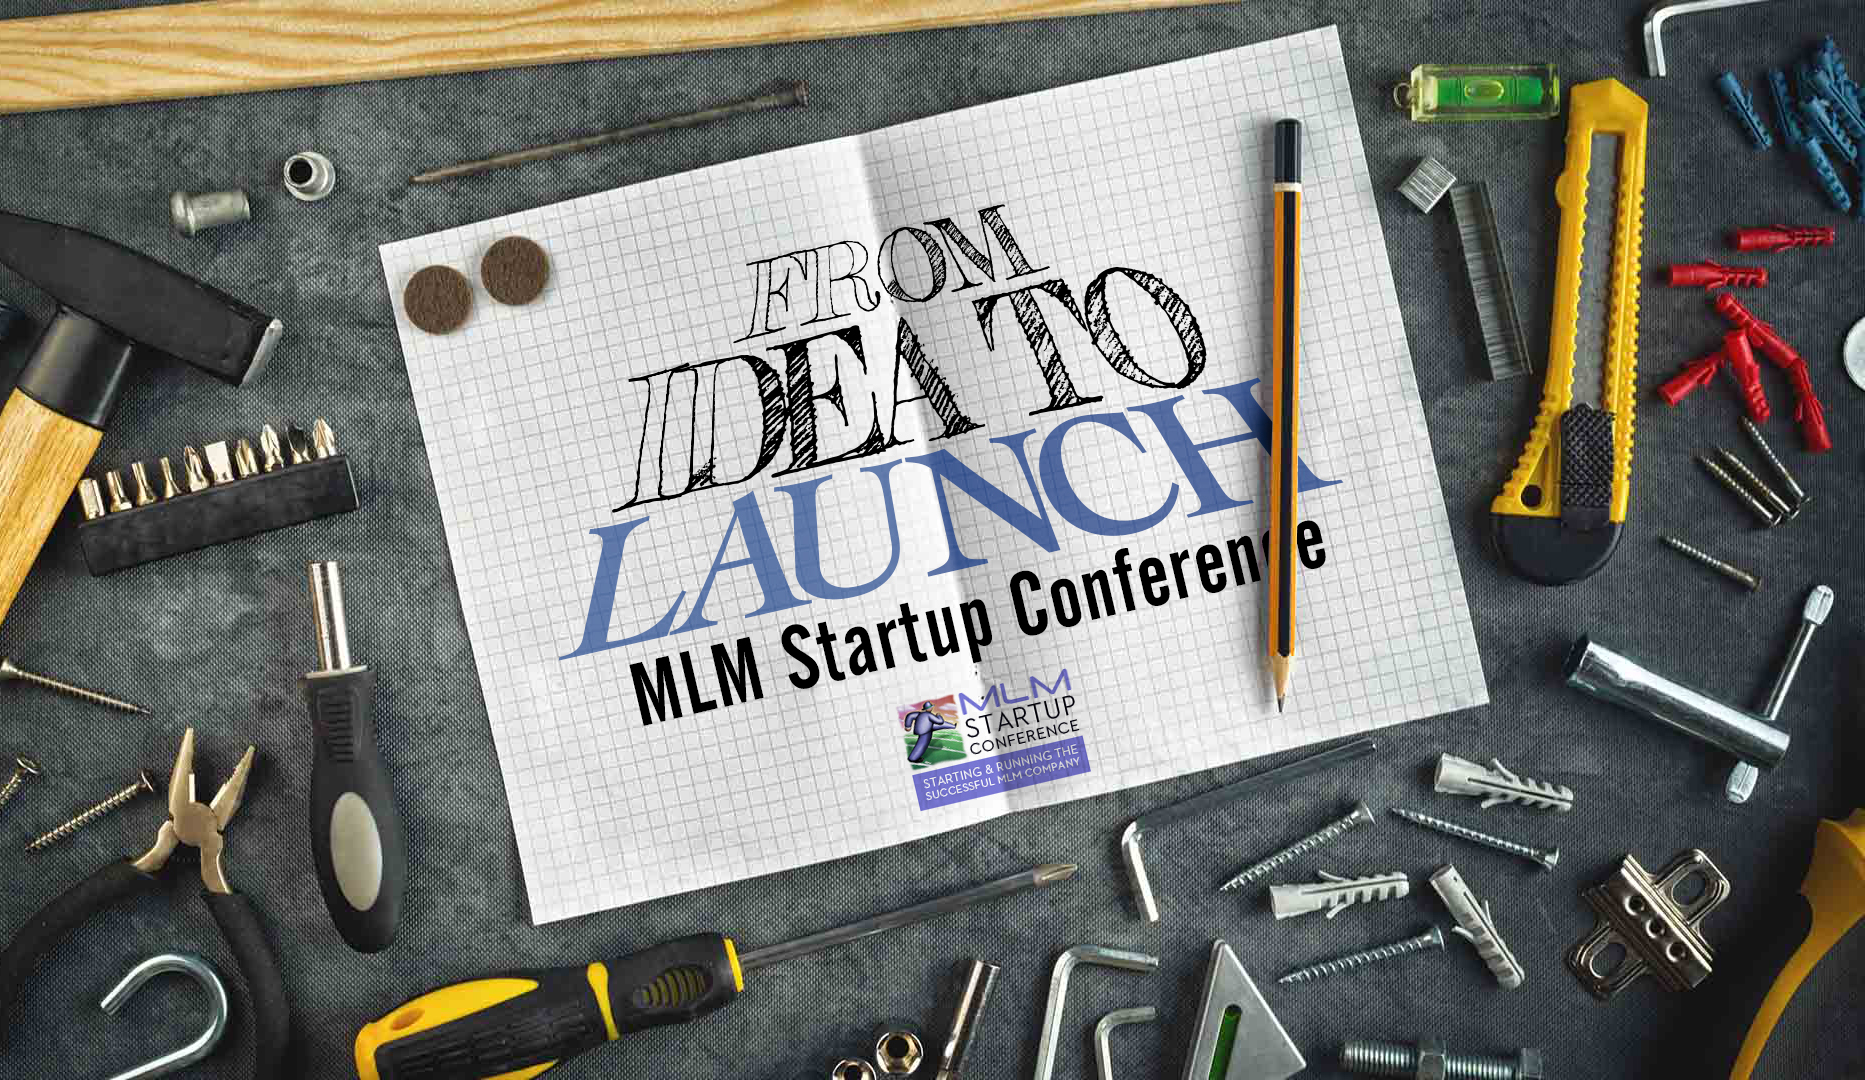 The Starting and Running the Successful MLM Company Conference